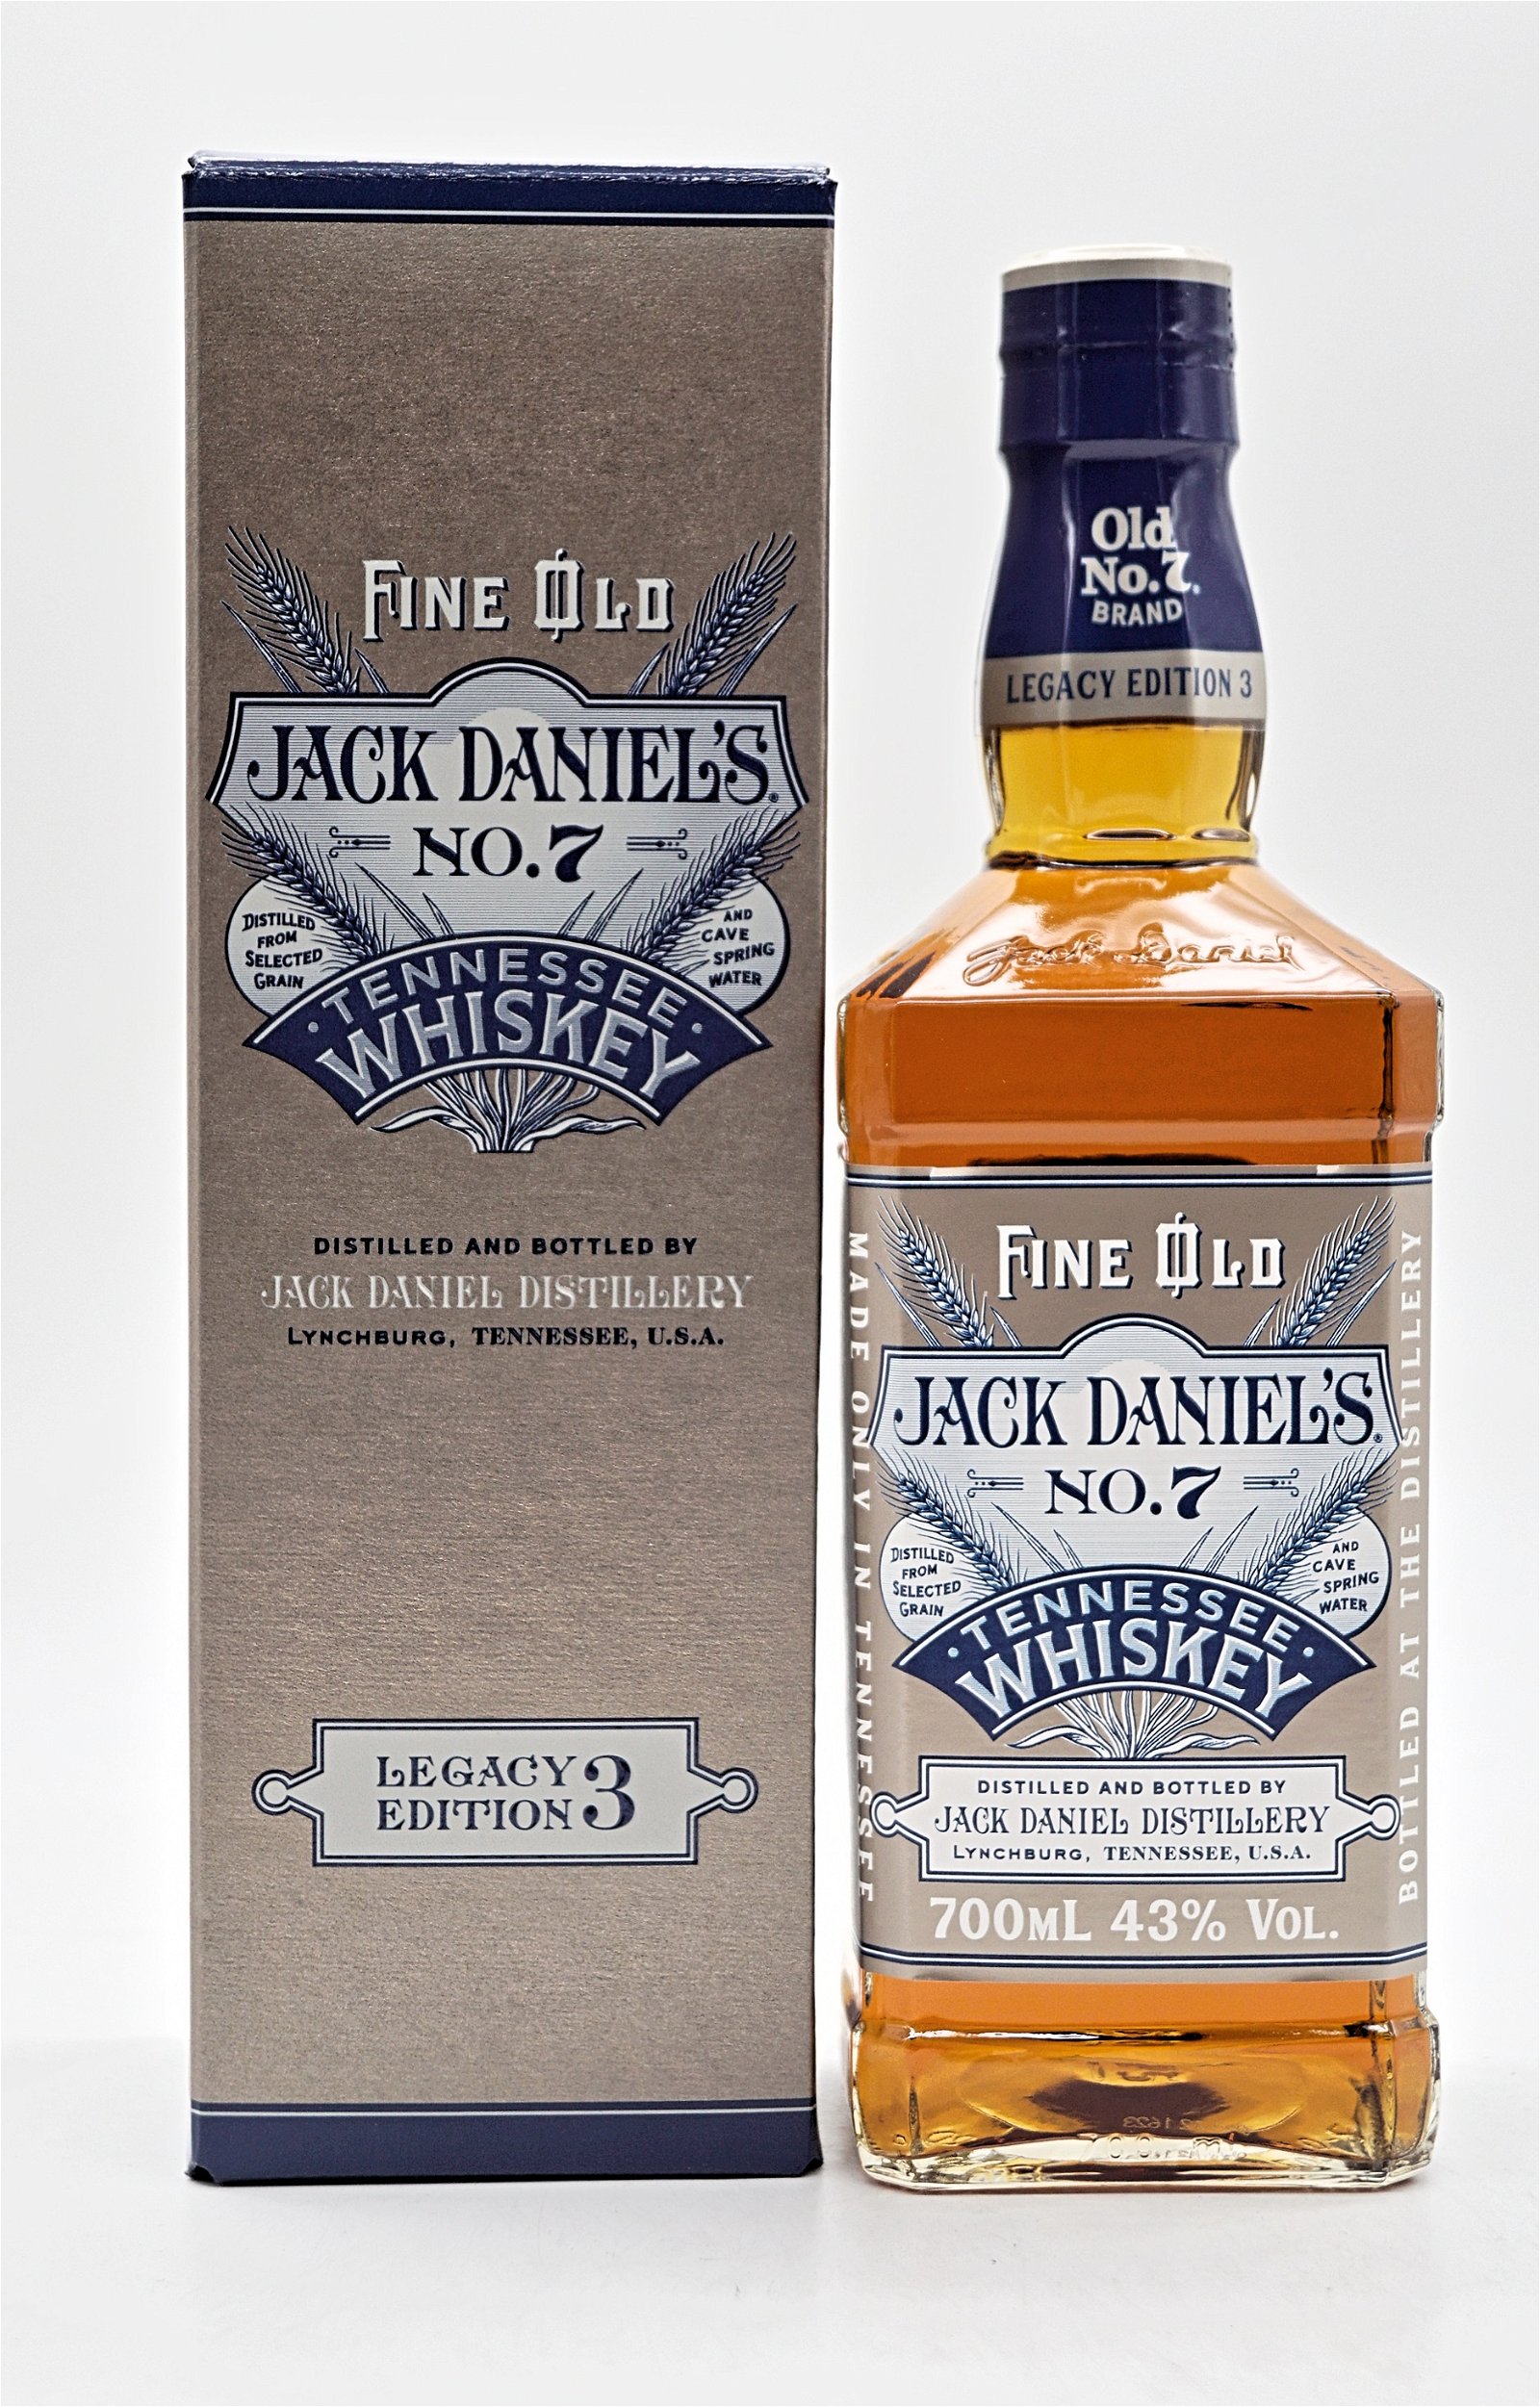 Jack Daniels Legacy Edition 3 Old No 7 Tennessee Whiskey